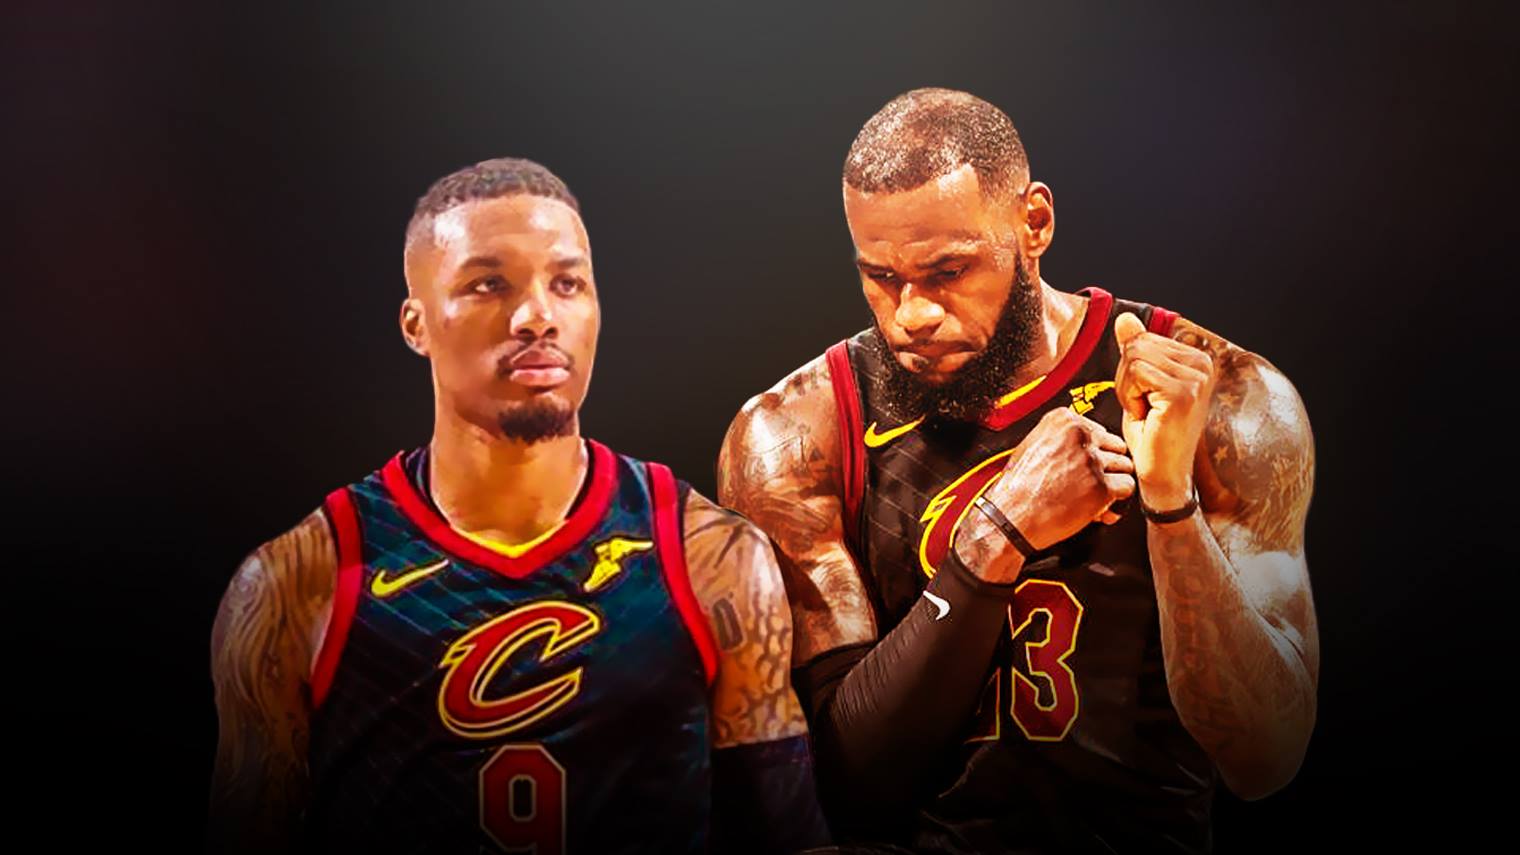 What LeBron James and Damian Lillard on the Cavs would look like1520 x 855